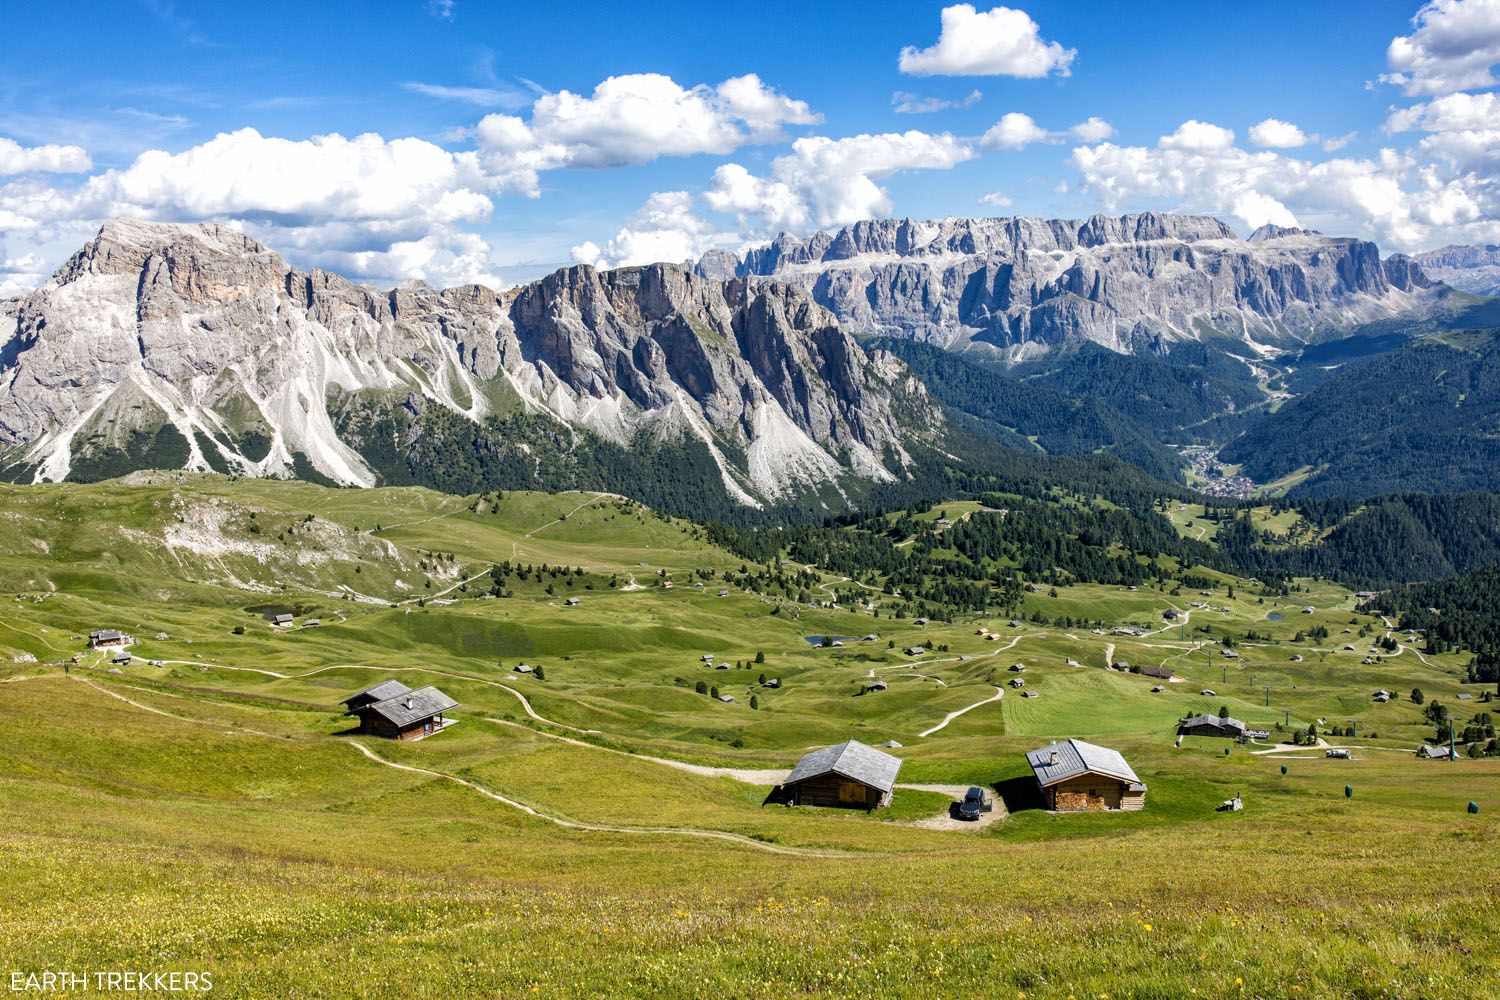 Dolomites | How to plan a trip to the Dolomites